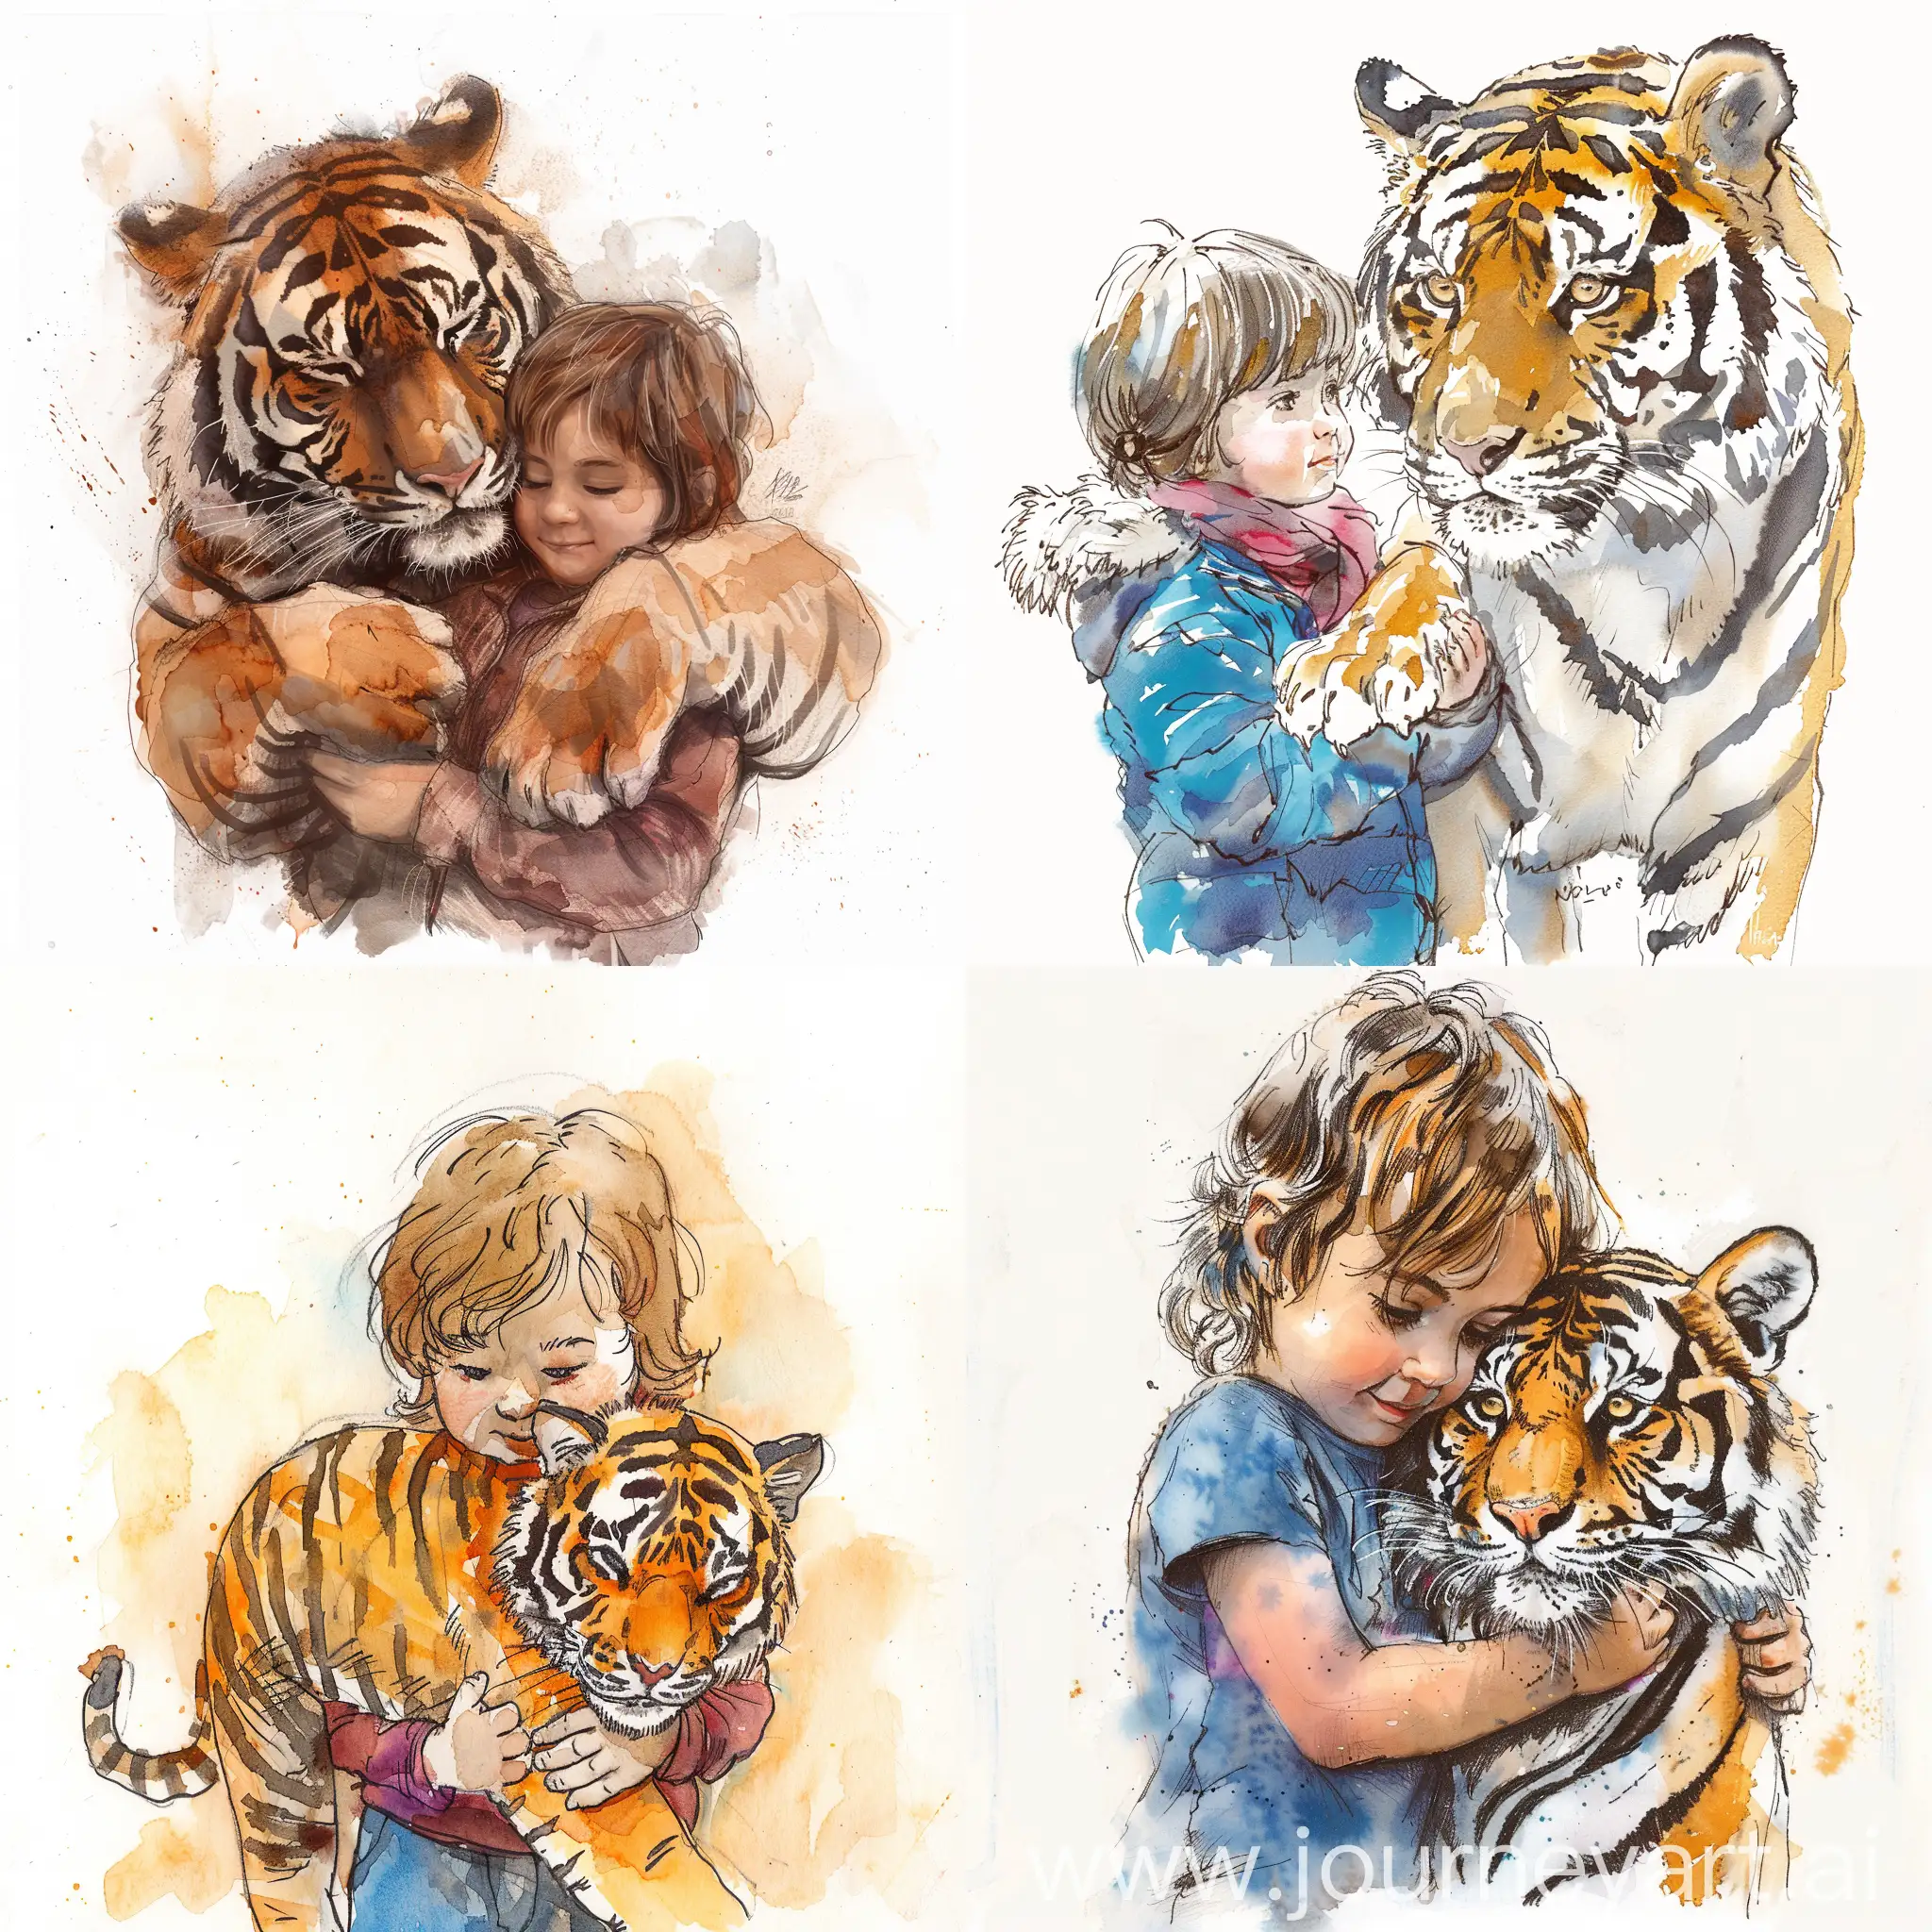 Child-Gently-Embracing-a-Tiger-in-Vibrant-Watercolor